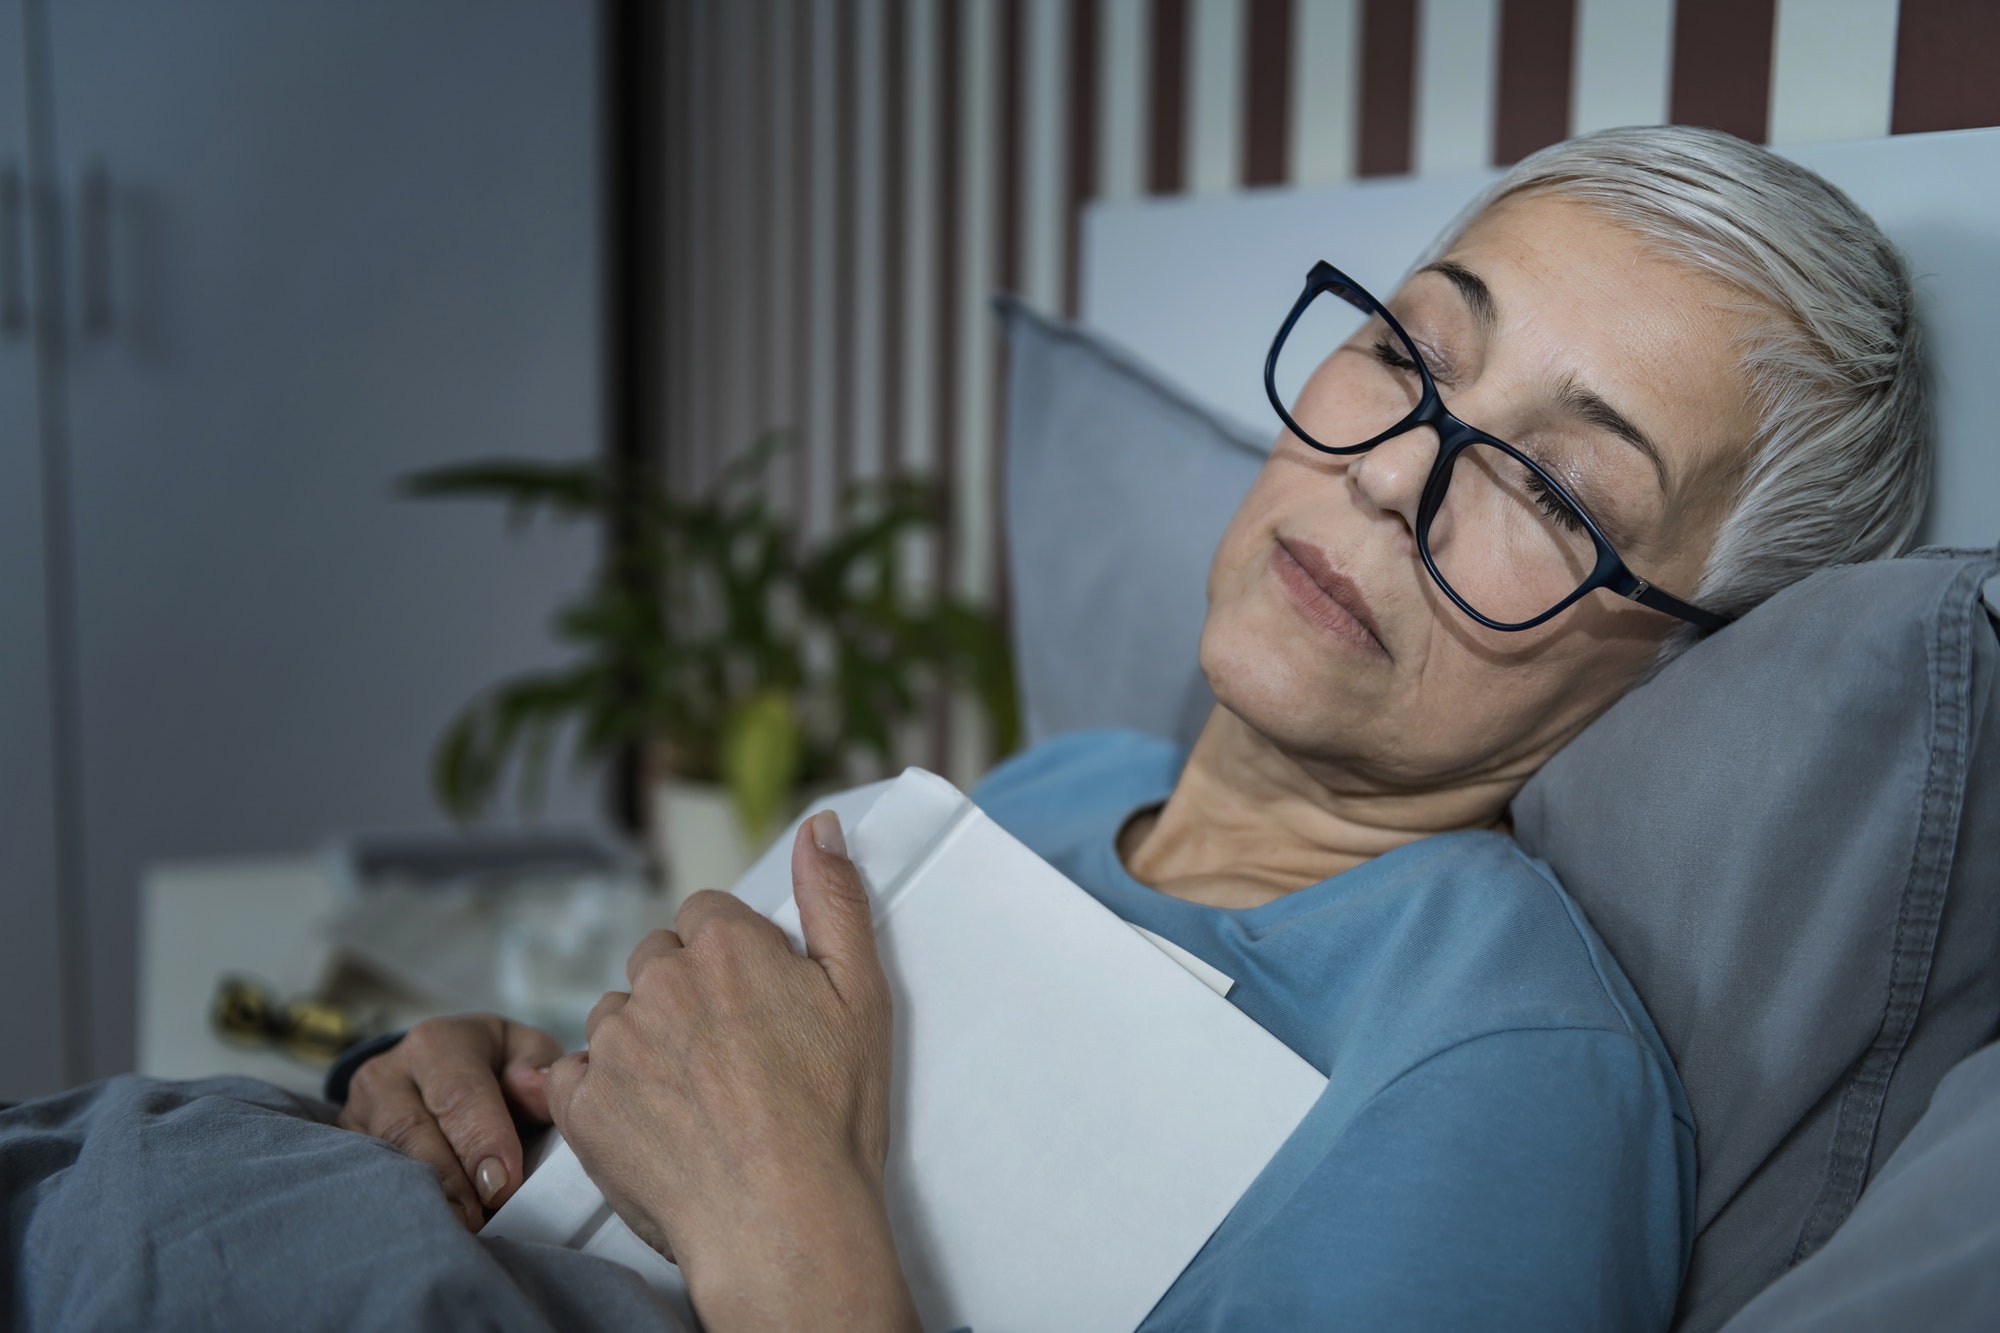 Sleep. Senior Woman Falling Asleep with a Glasses on and a Book on her Chest